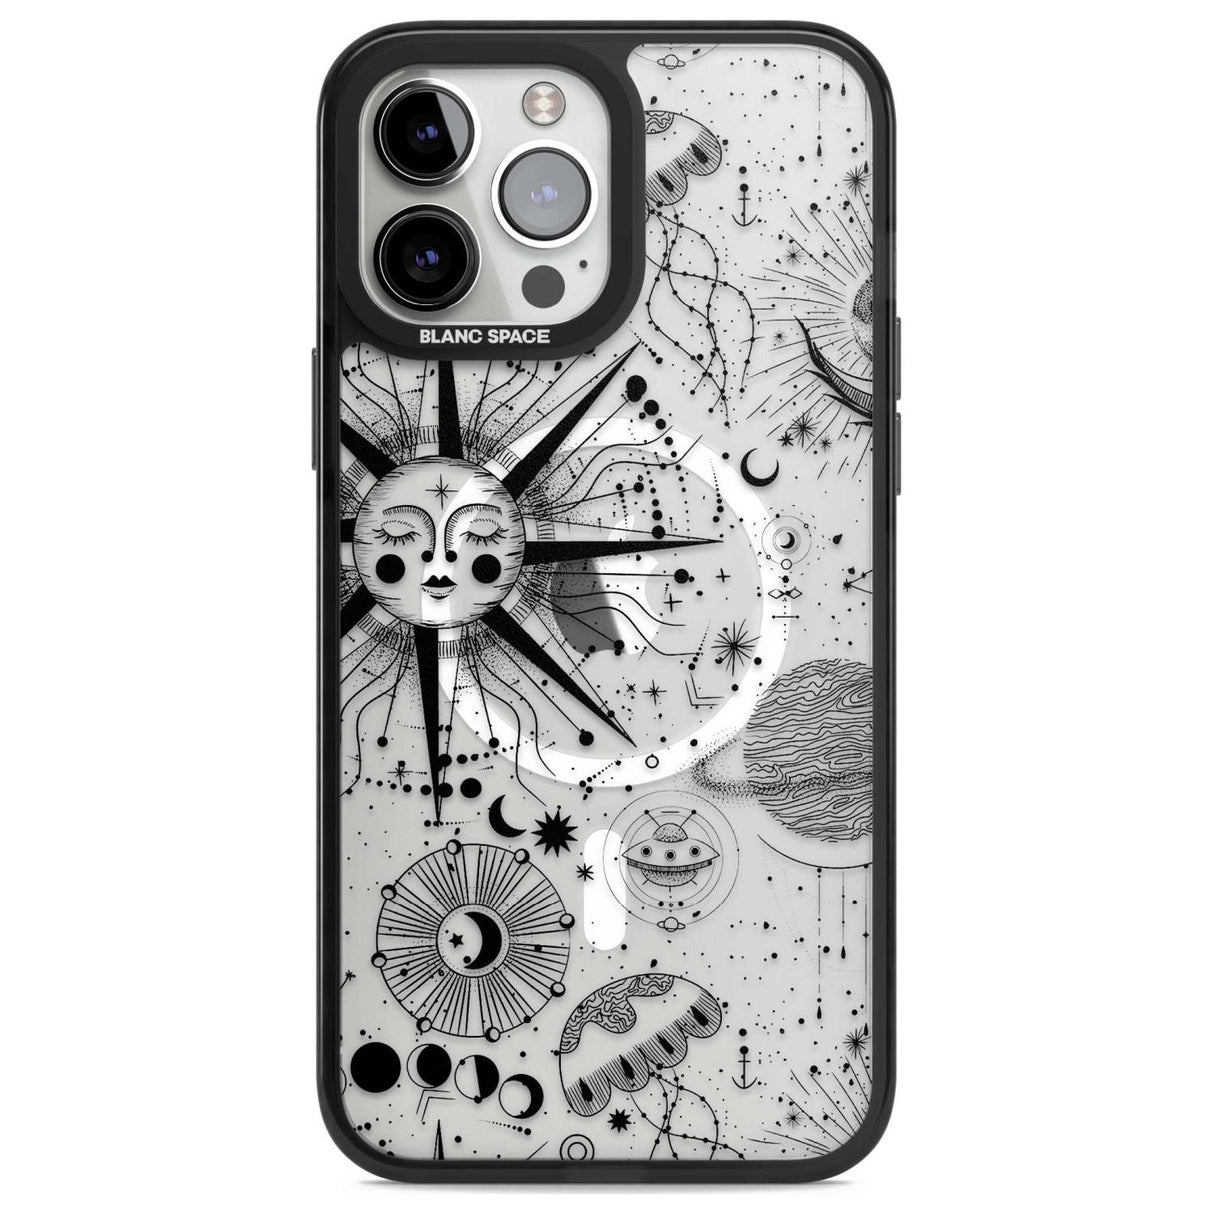 Large Sun Vintage Astrological Phone Case iPhone 13 Pro Max / Magsafe Black Impact Case Blanc Space